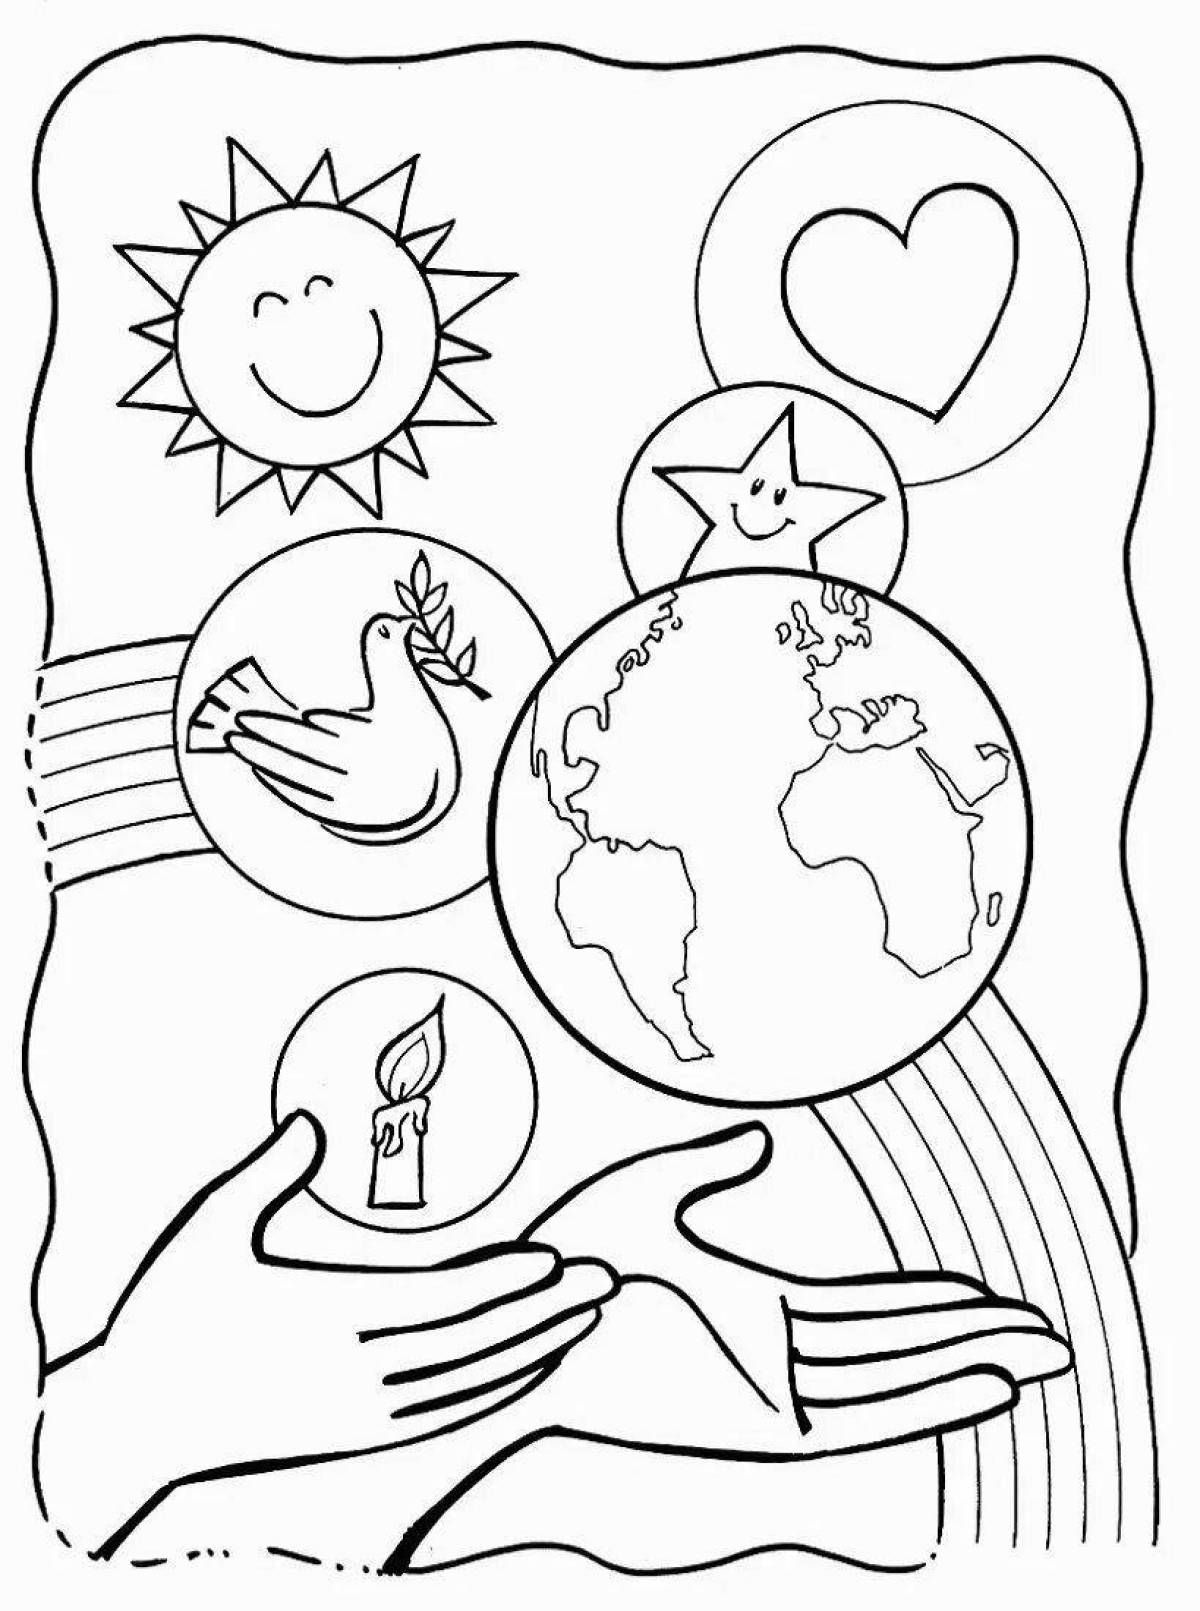 Awesome coloring page 